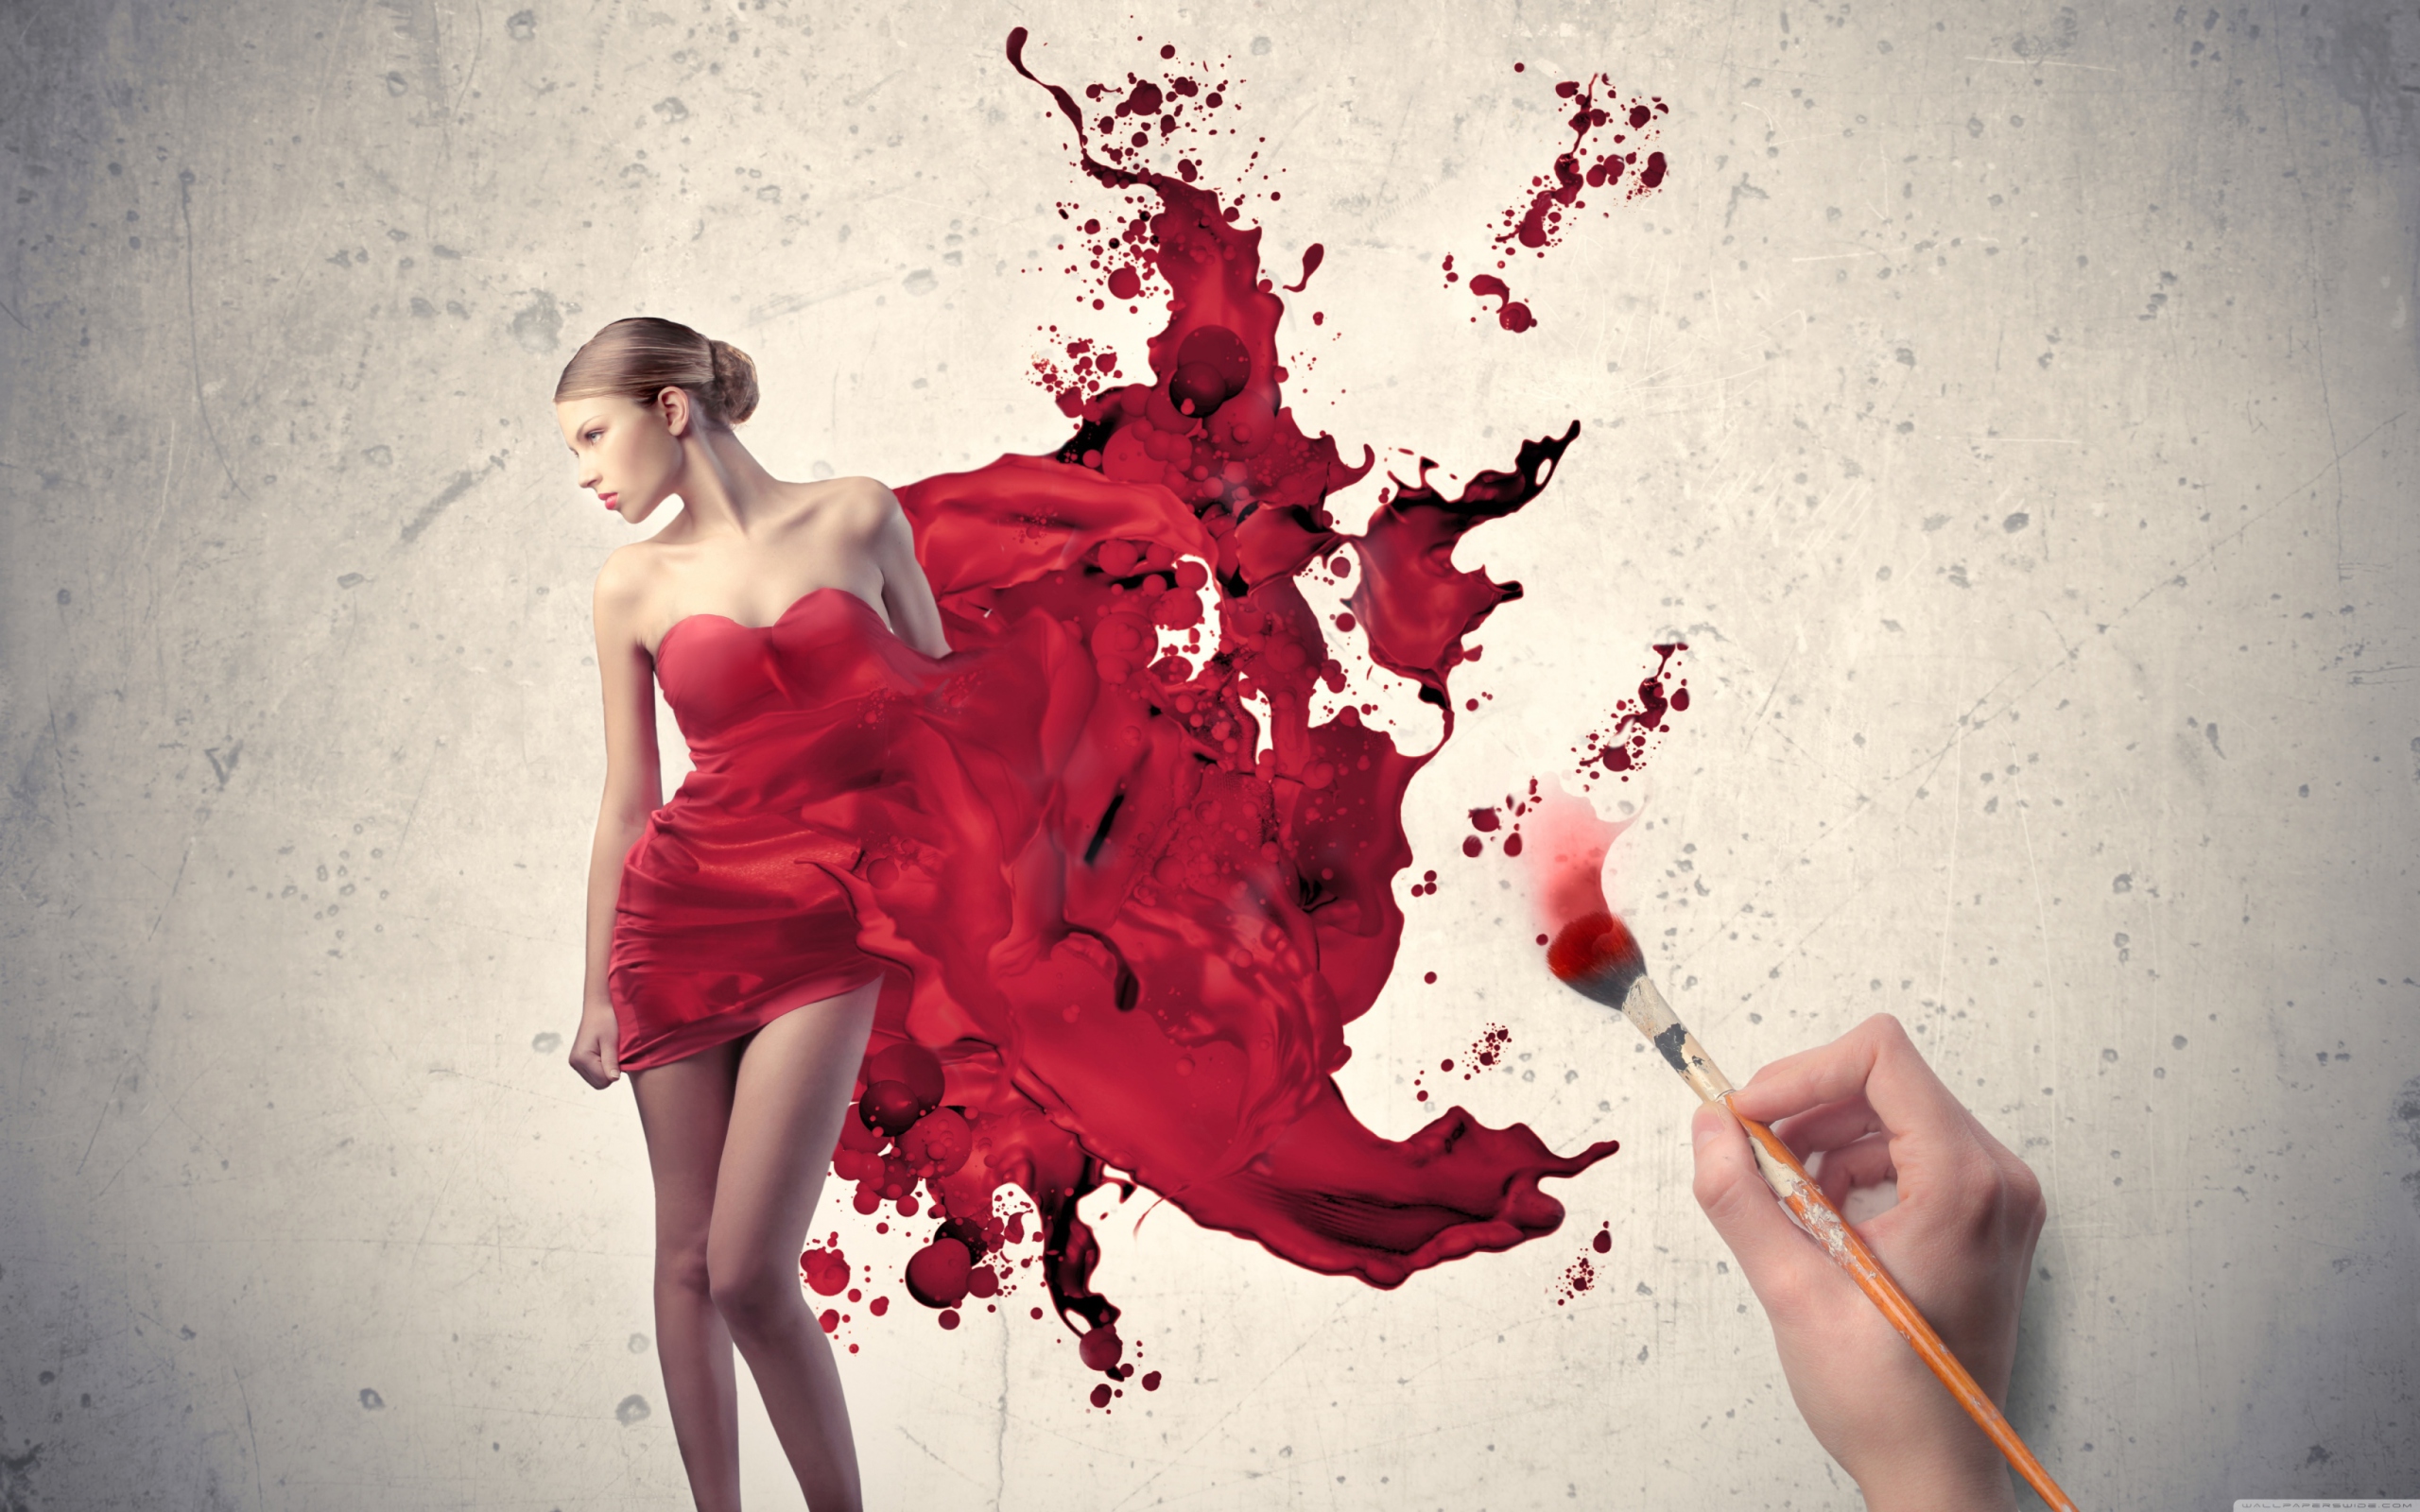 Girl In Painted Red Dress wallpaper 2560x1600